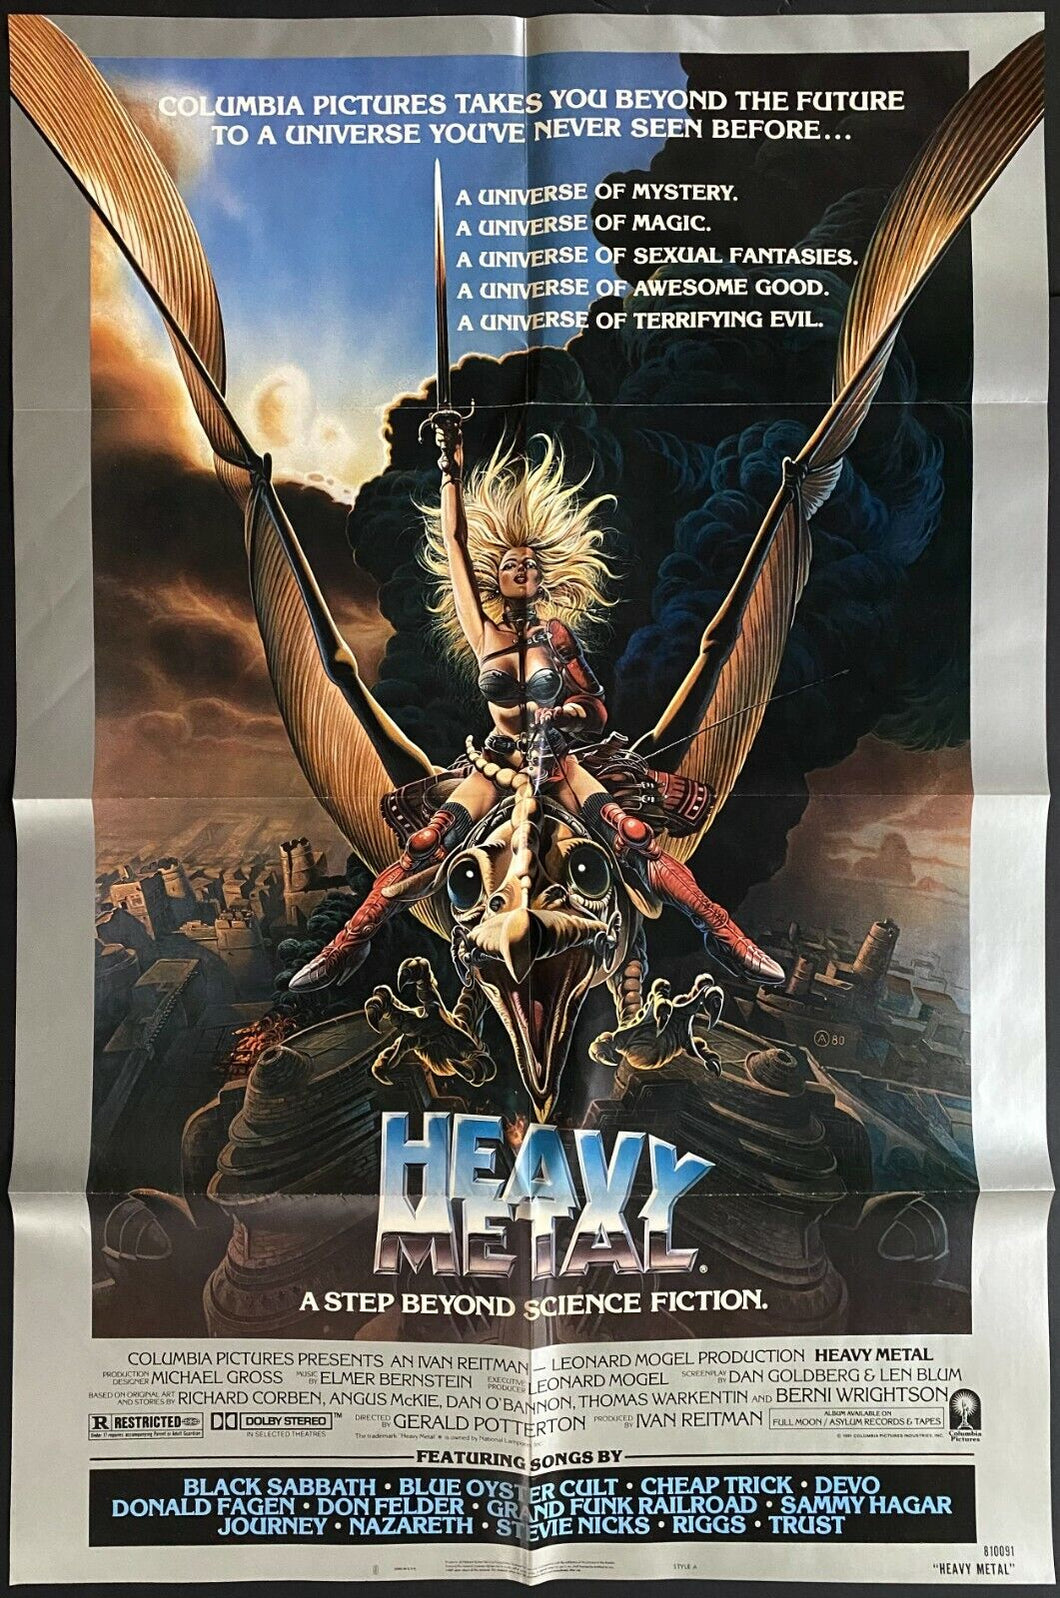 1981 Vintage Heavy Metal Movie Poster Adult Animated Sci-Fi John Candy